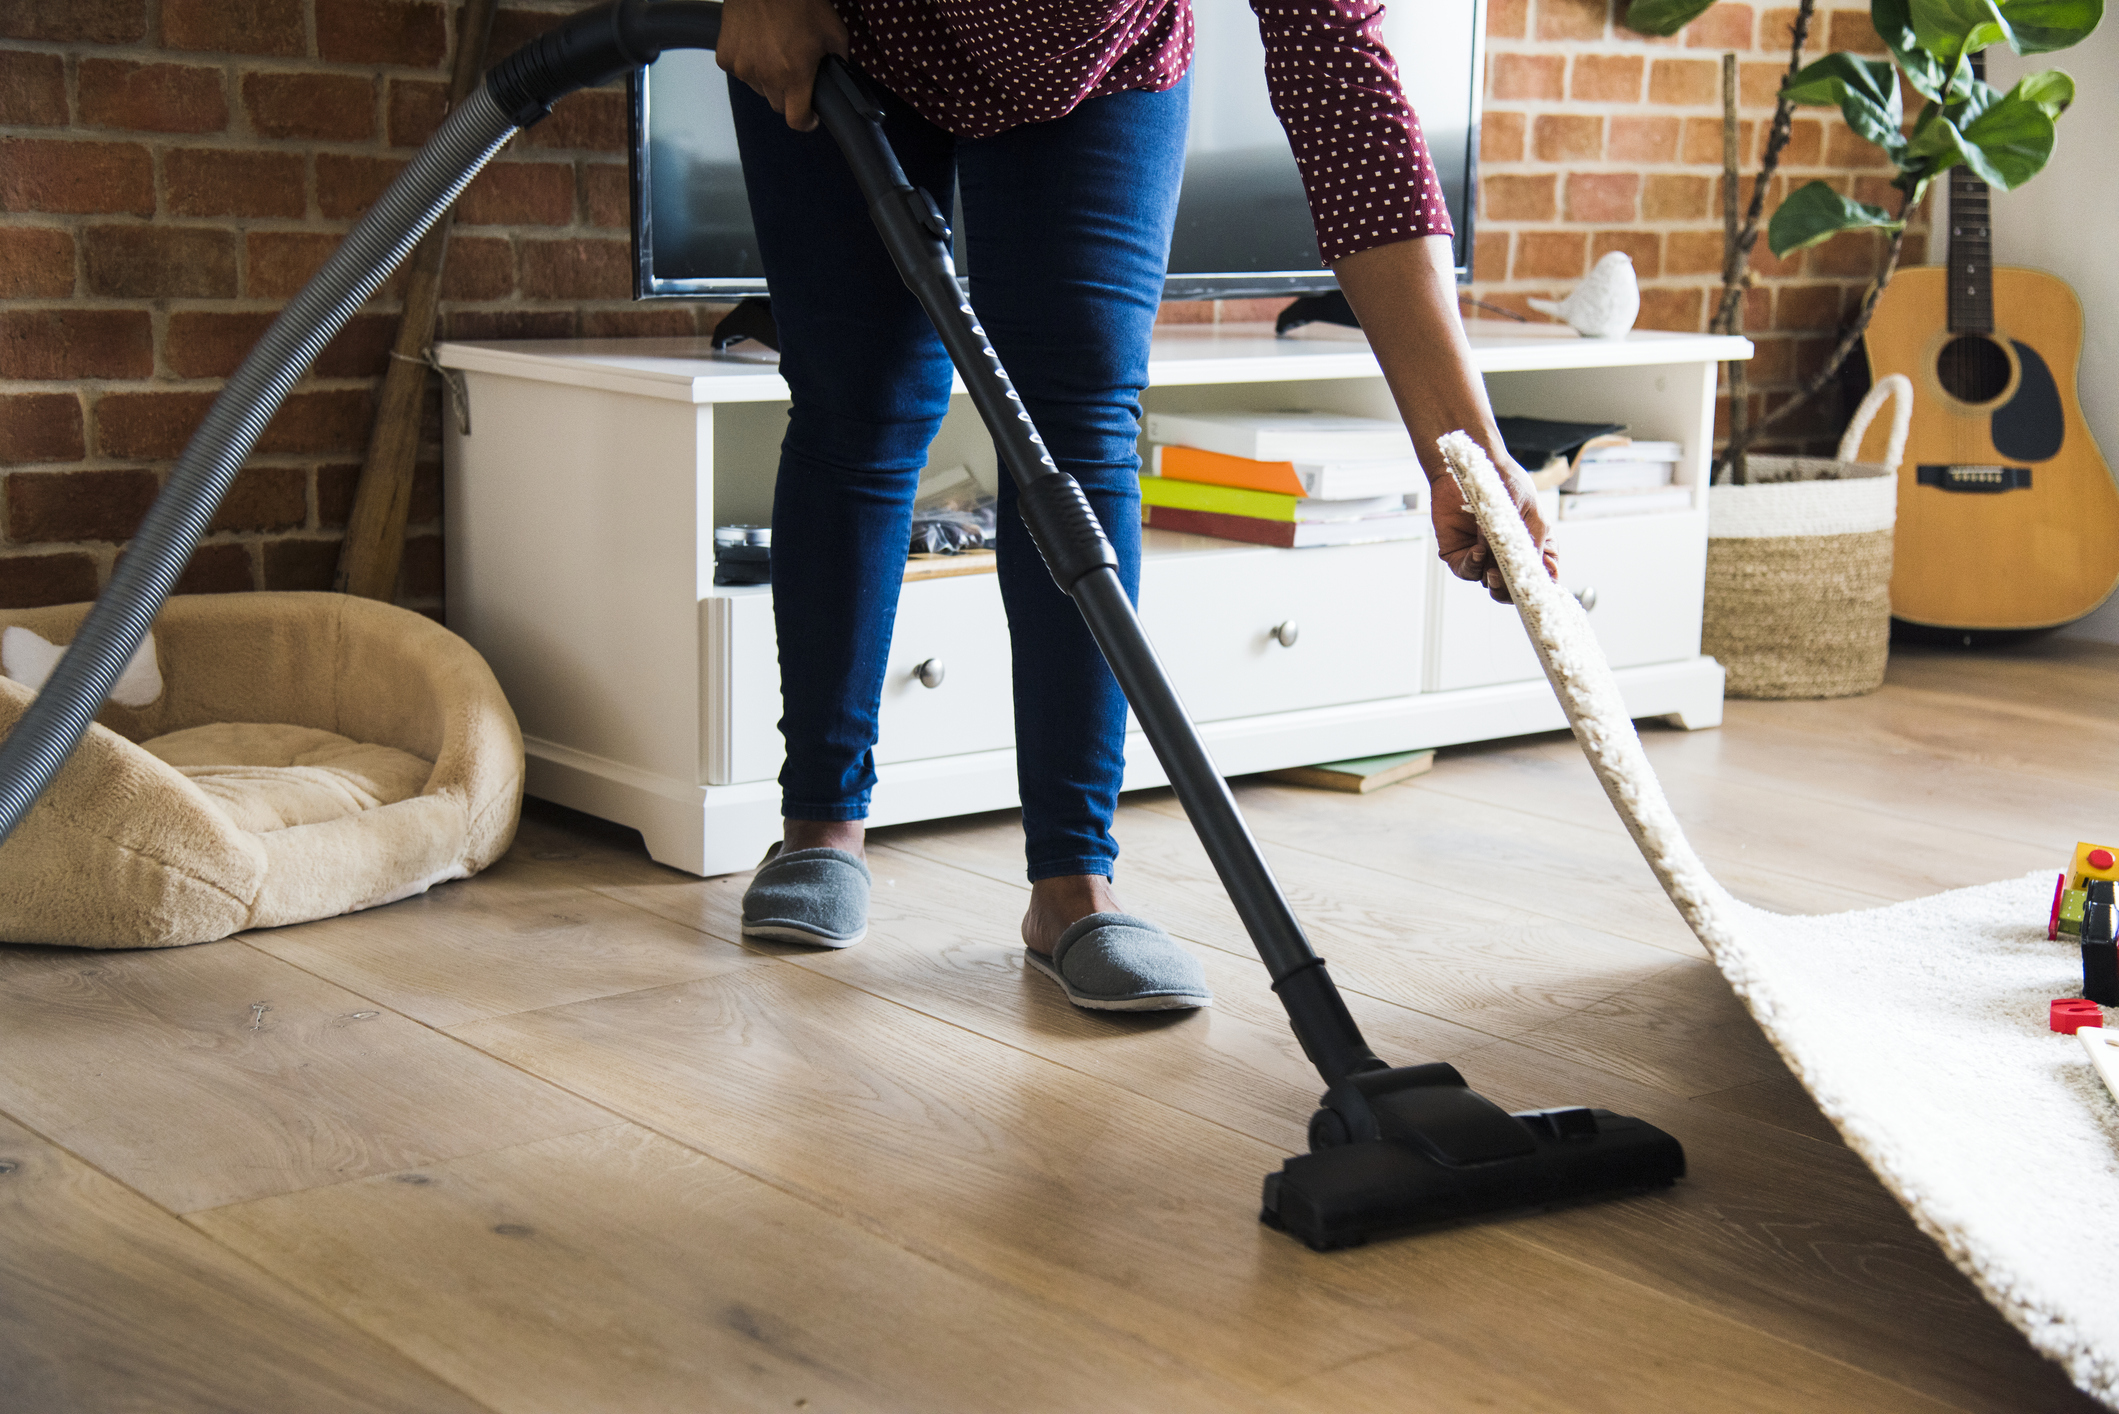 An unexpected perk of housework: Healthy aging